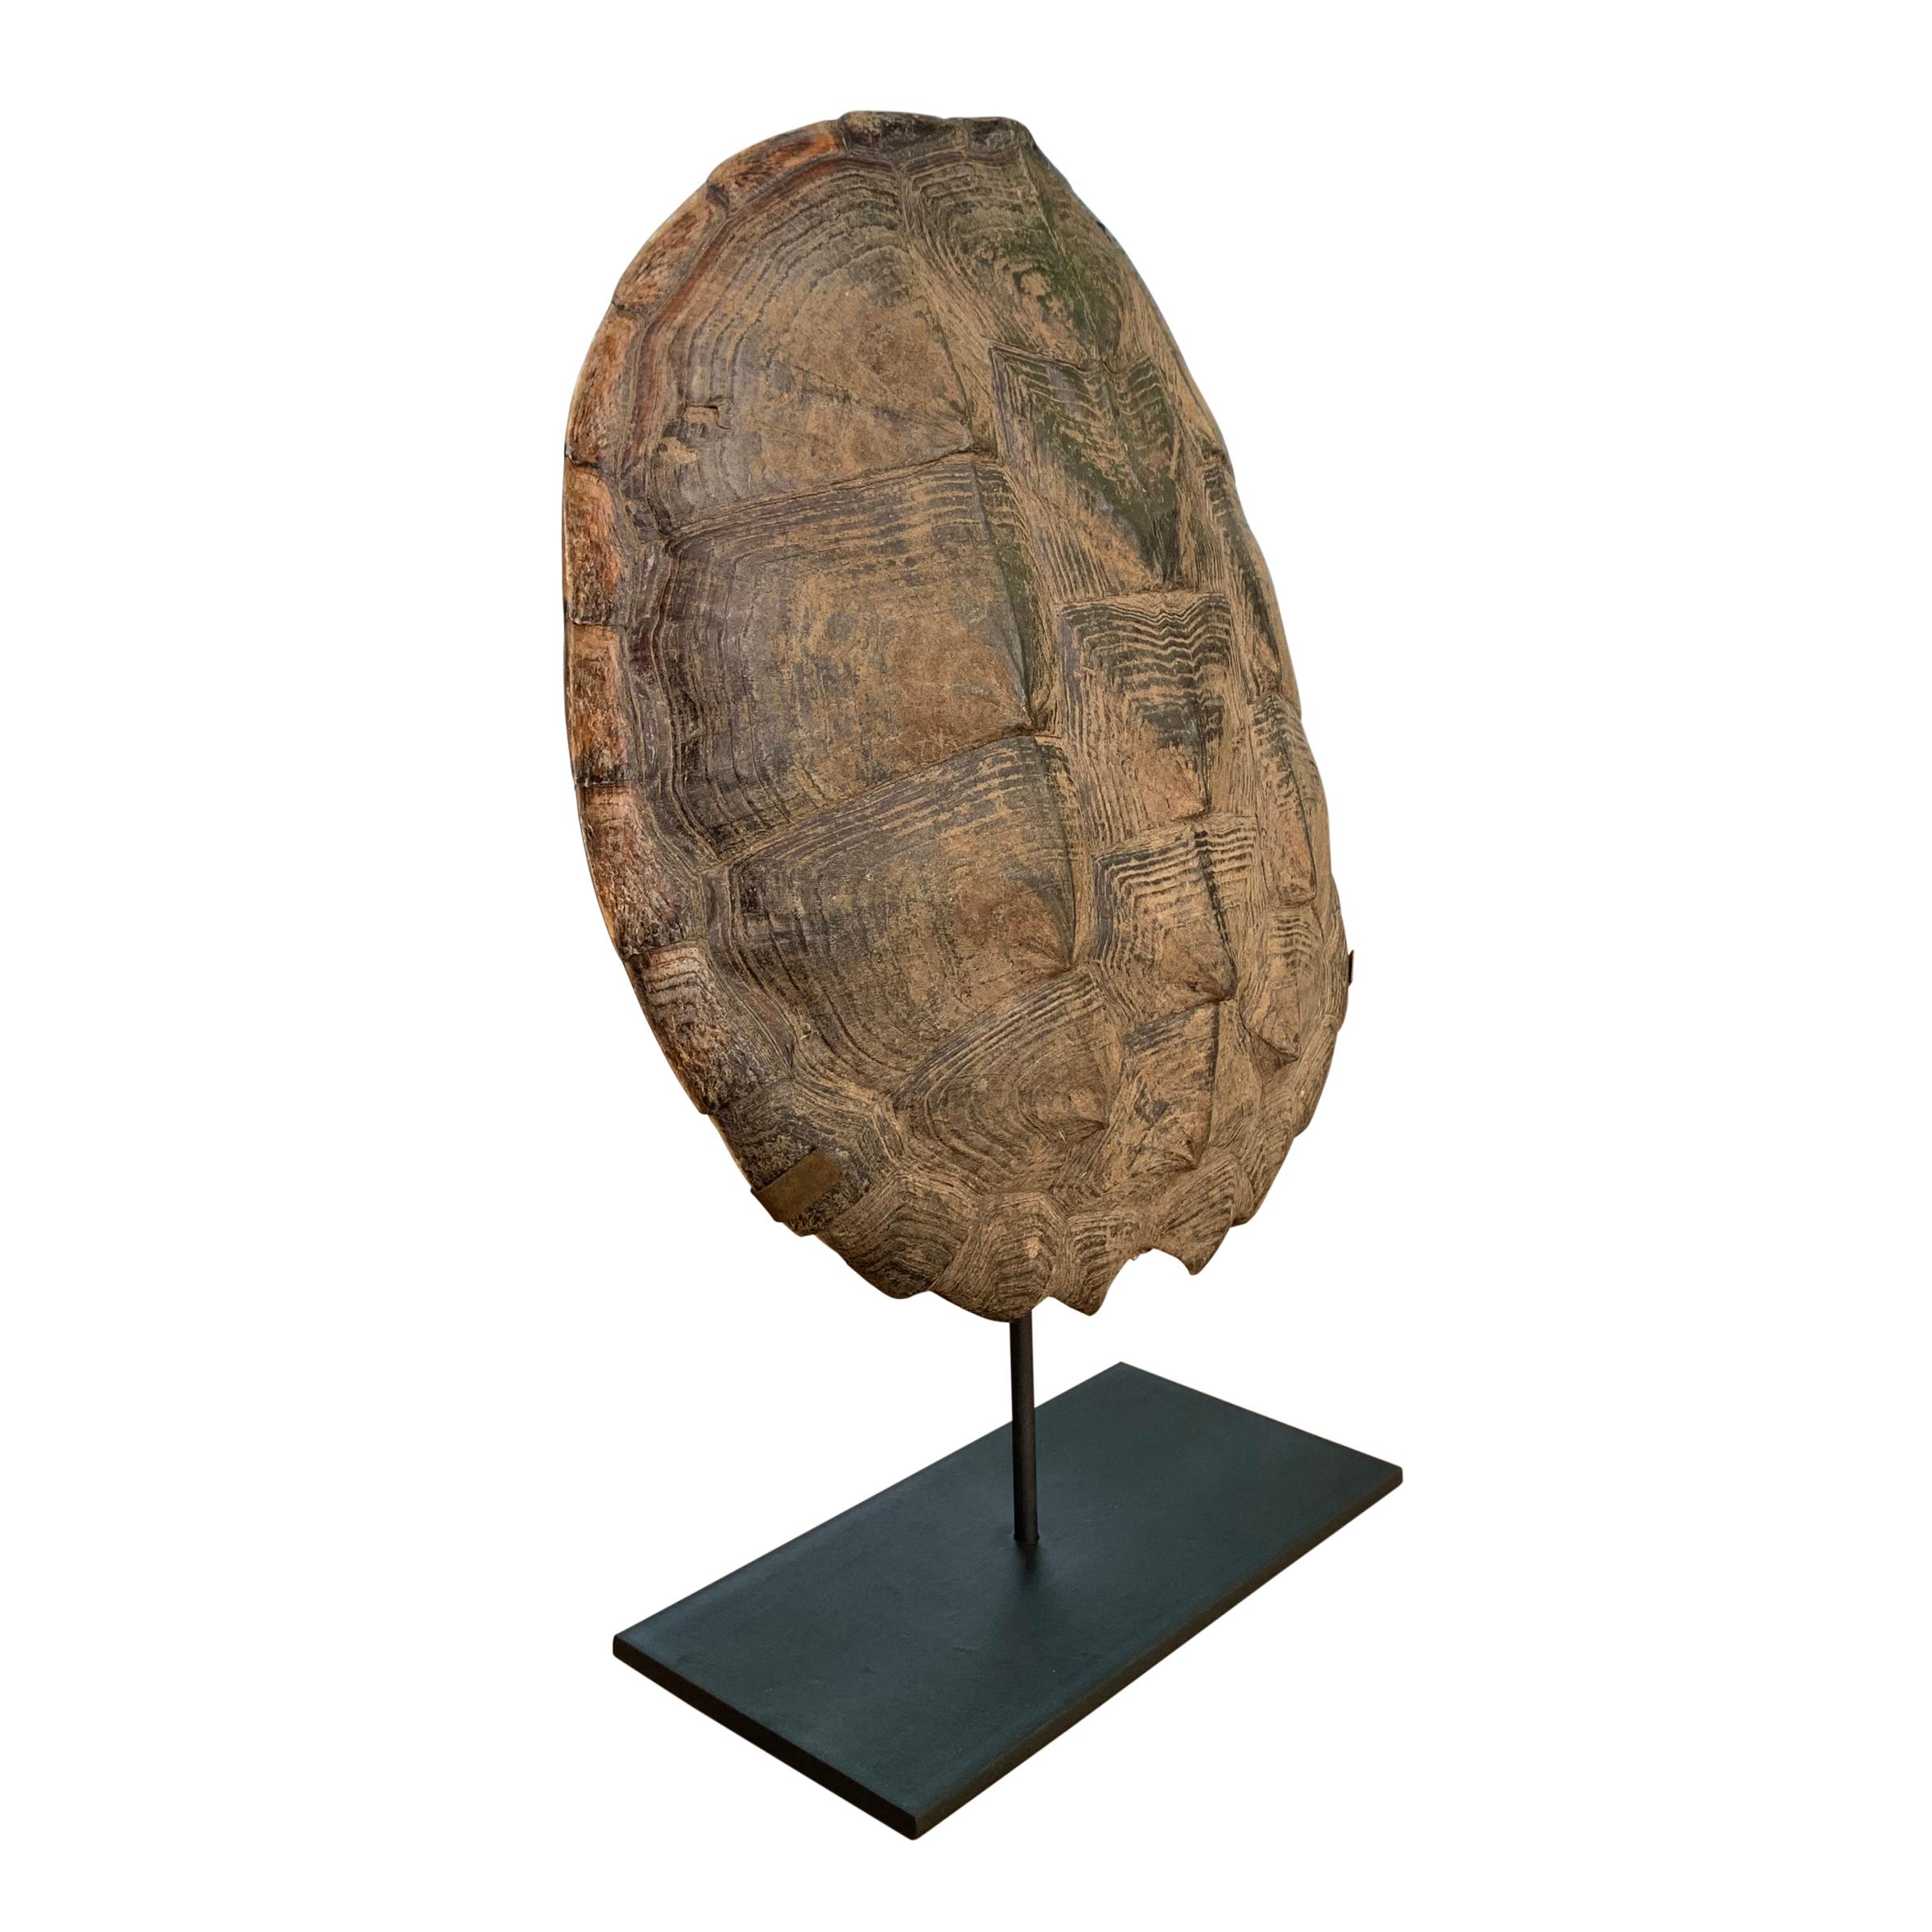 A beautiful American snapping turtle shell with a wonderful pattern and patina mounted on a custom steel stand.